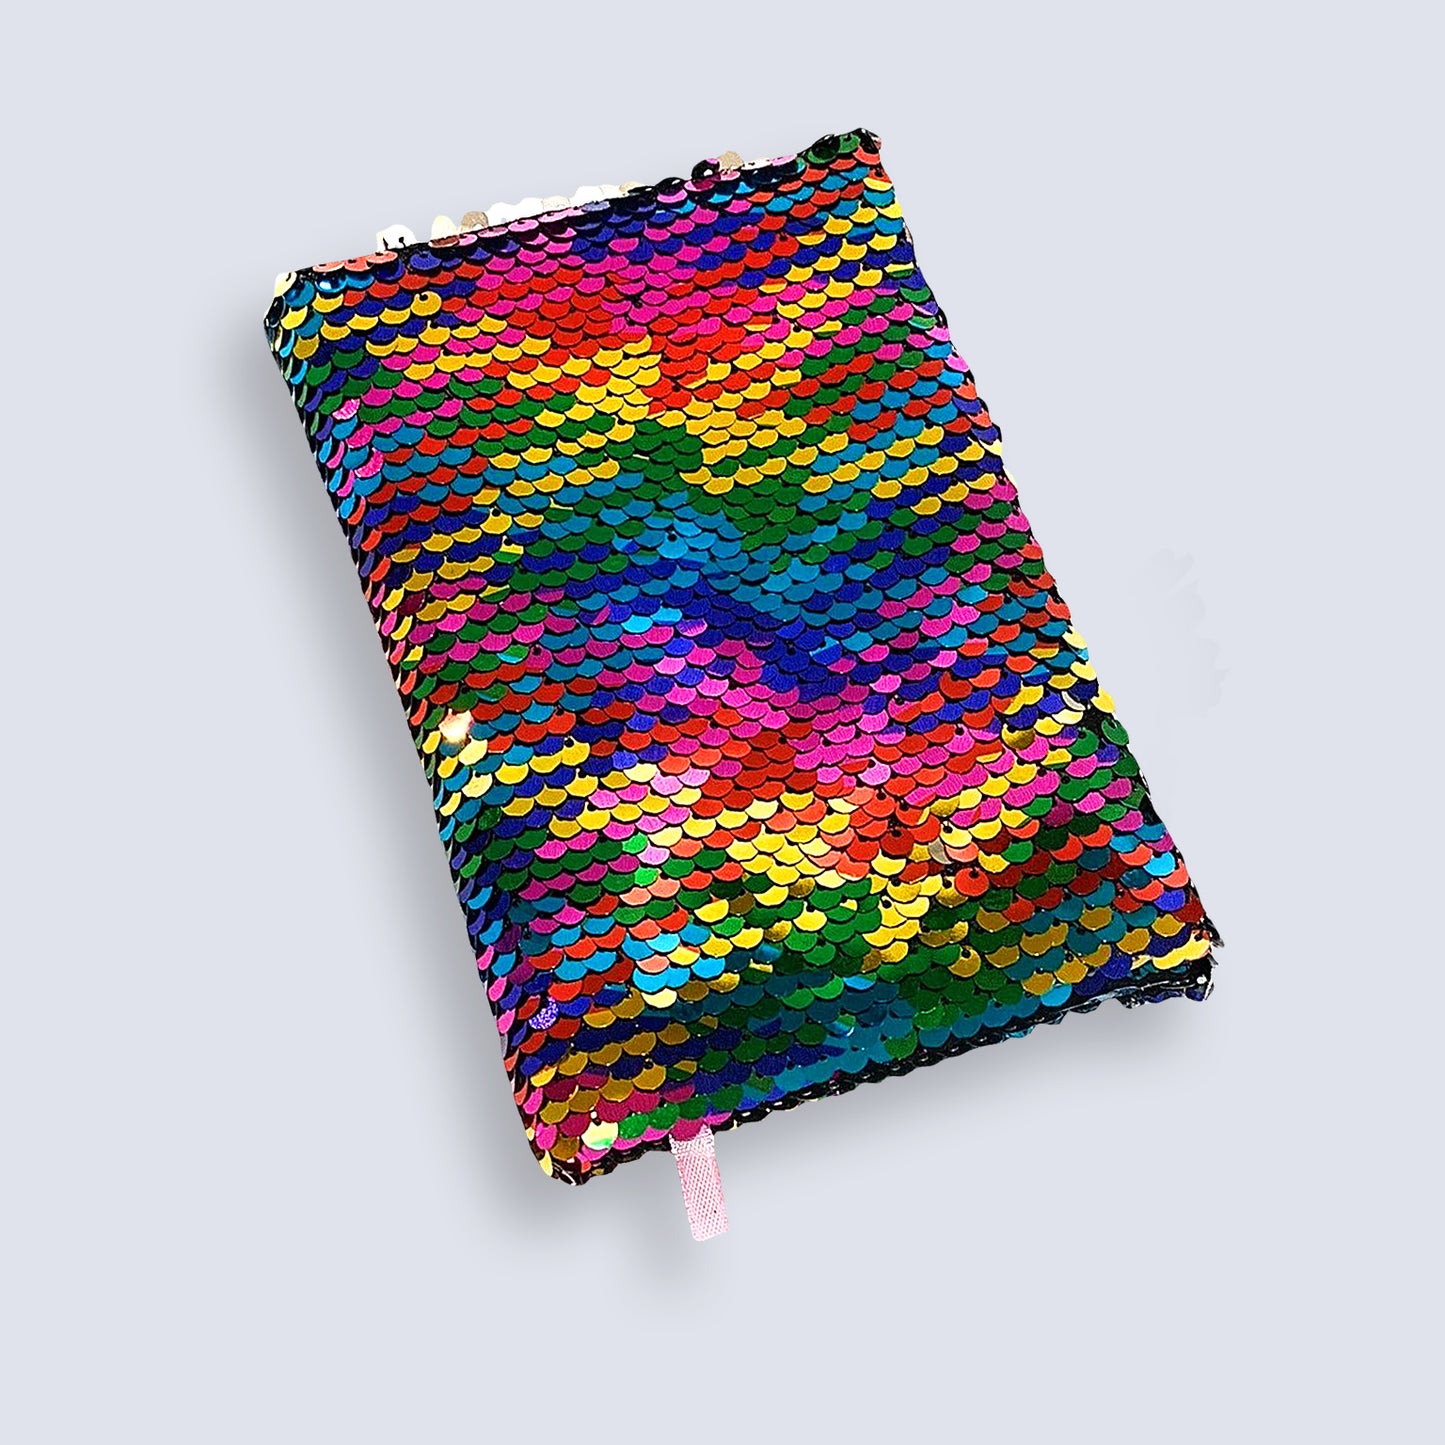 Small A6 Reversible Sequin Rainbow Notebook Notepad Journal Diary Book Xmas Girls Gift